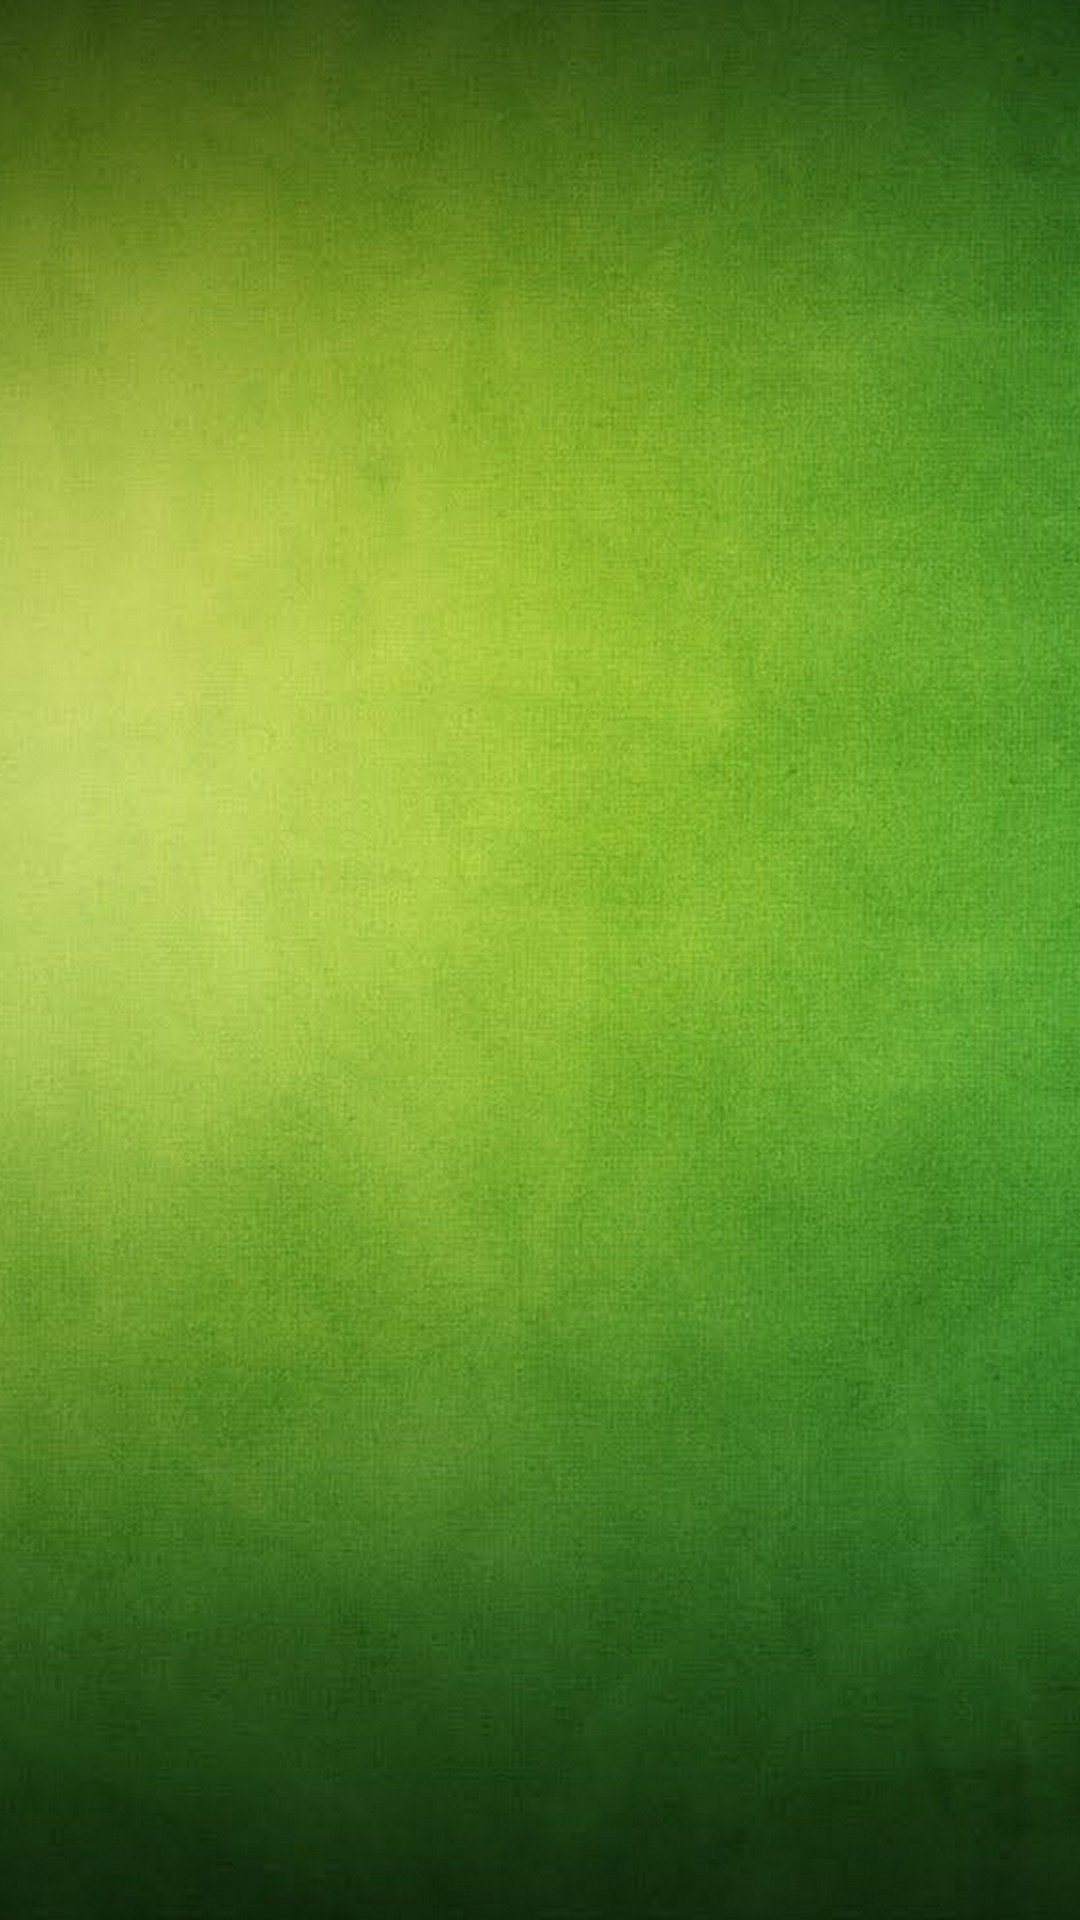 iPhone 7 Wallpaper Lime Green with image resolution 1080x1920 pixel. You can make this wallpaper for your iPhone 5, 6, 7, 8, X backgrounds, Mobile Screensaver, or iPad Lock Screen